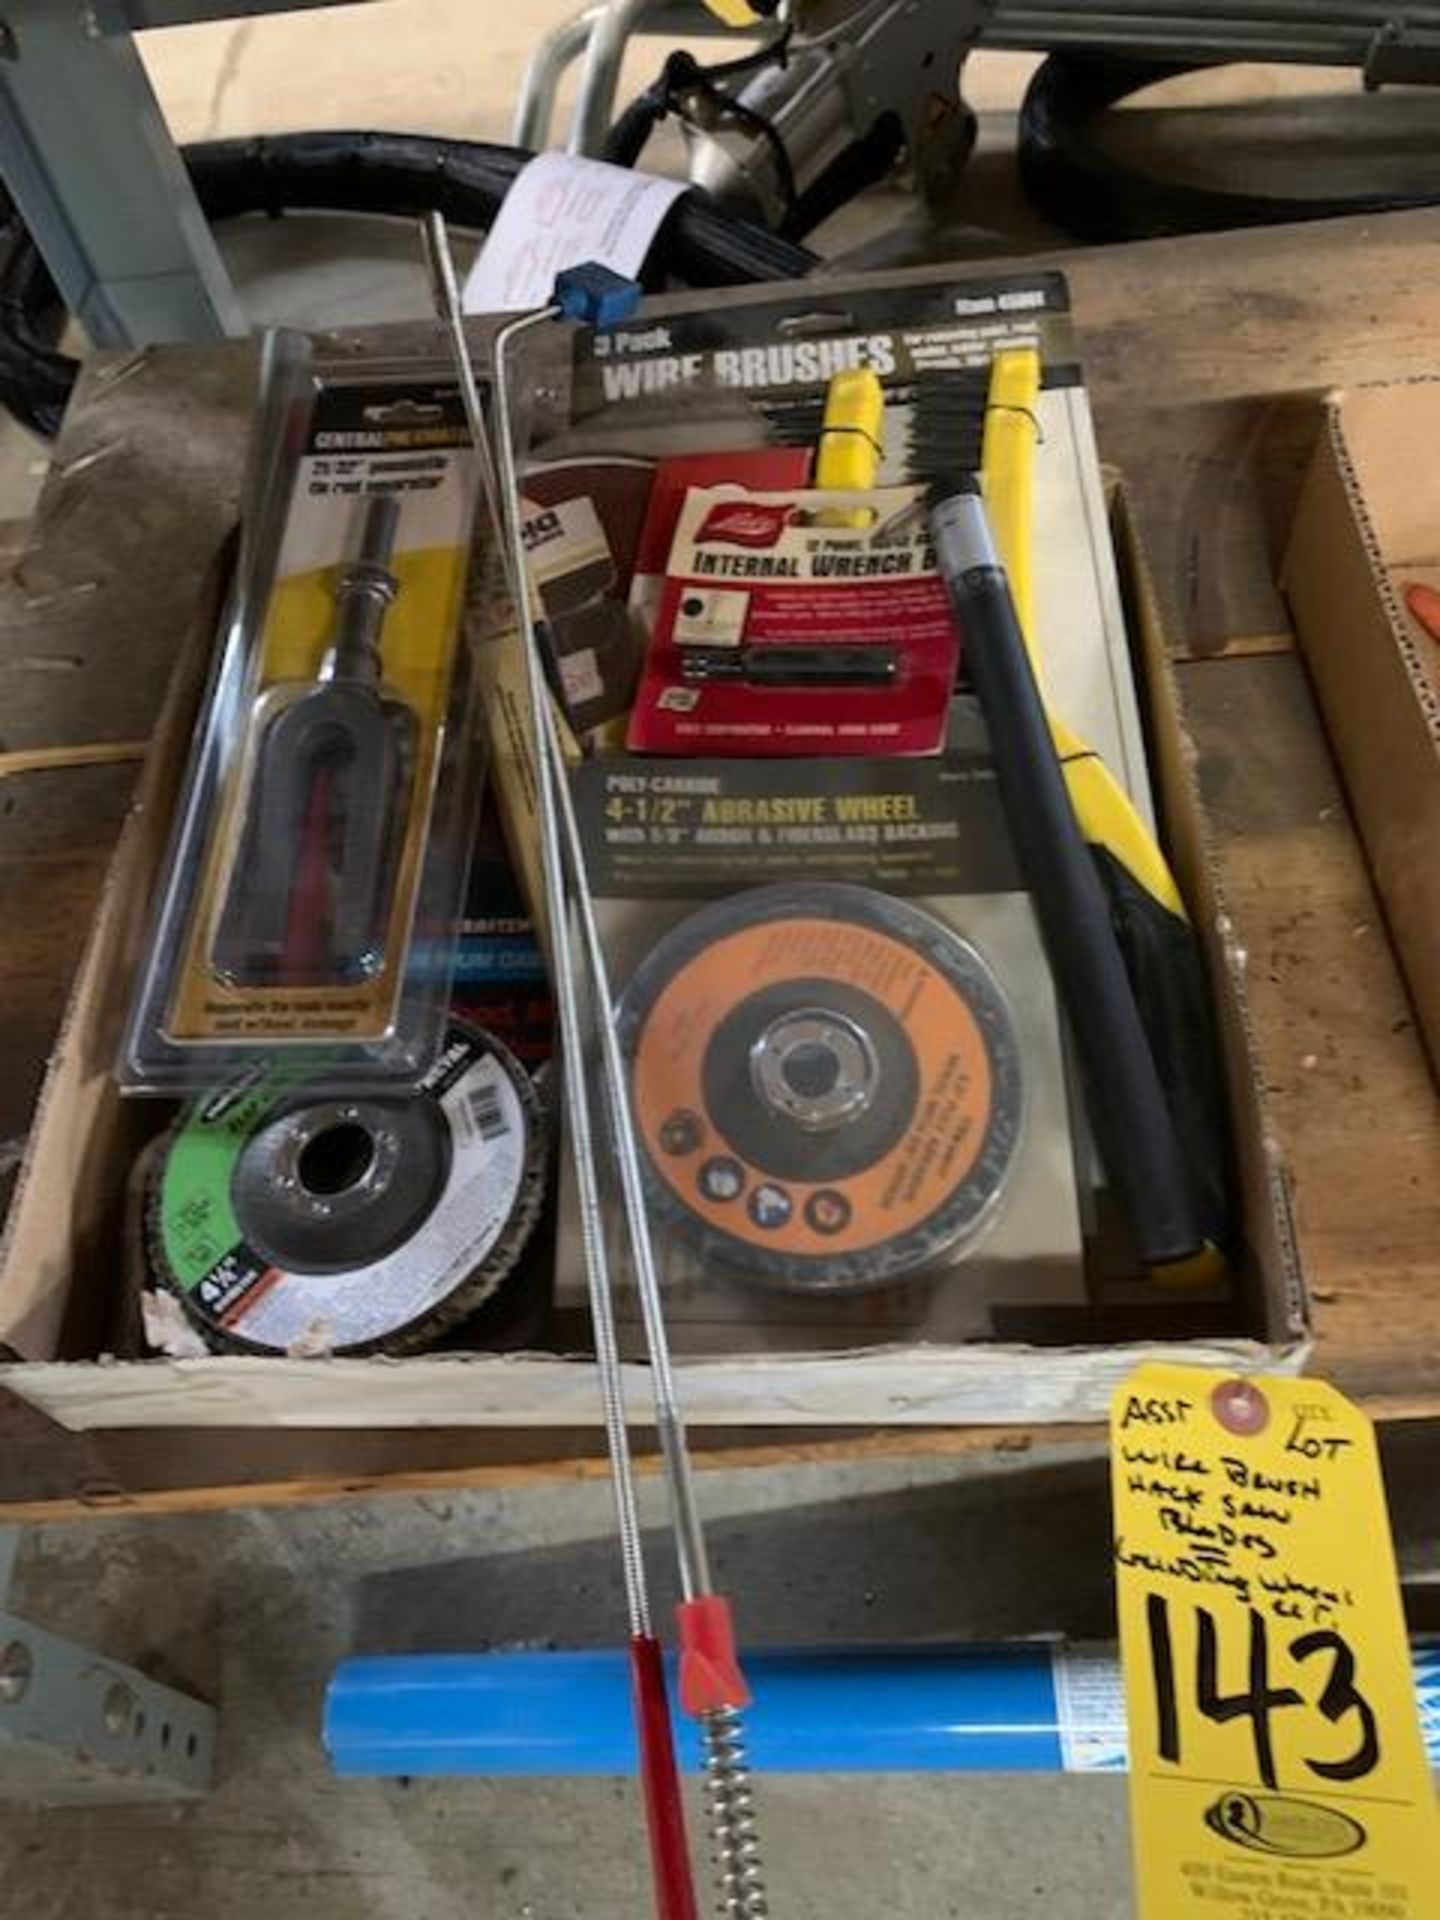 ASSORTED CUT-OFF AND ABRASIVE WHEELS, TIE ROD SEPARATERS, HACKSAW BLADES, INTERNAL WRENCH BIT...